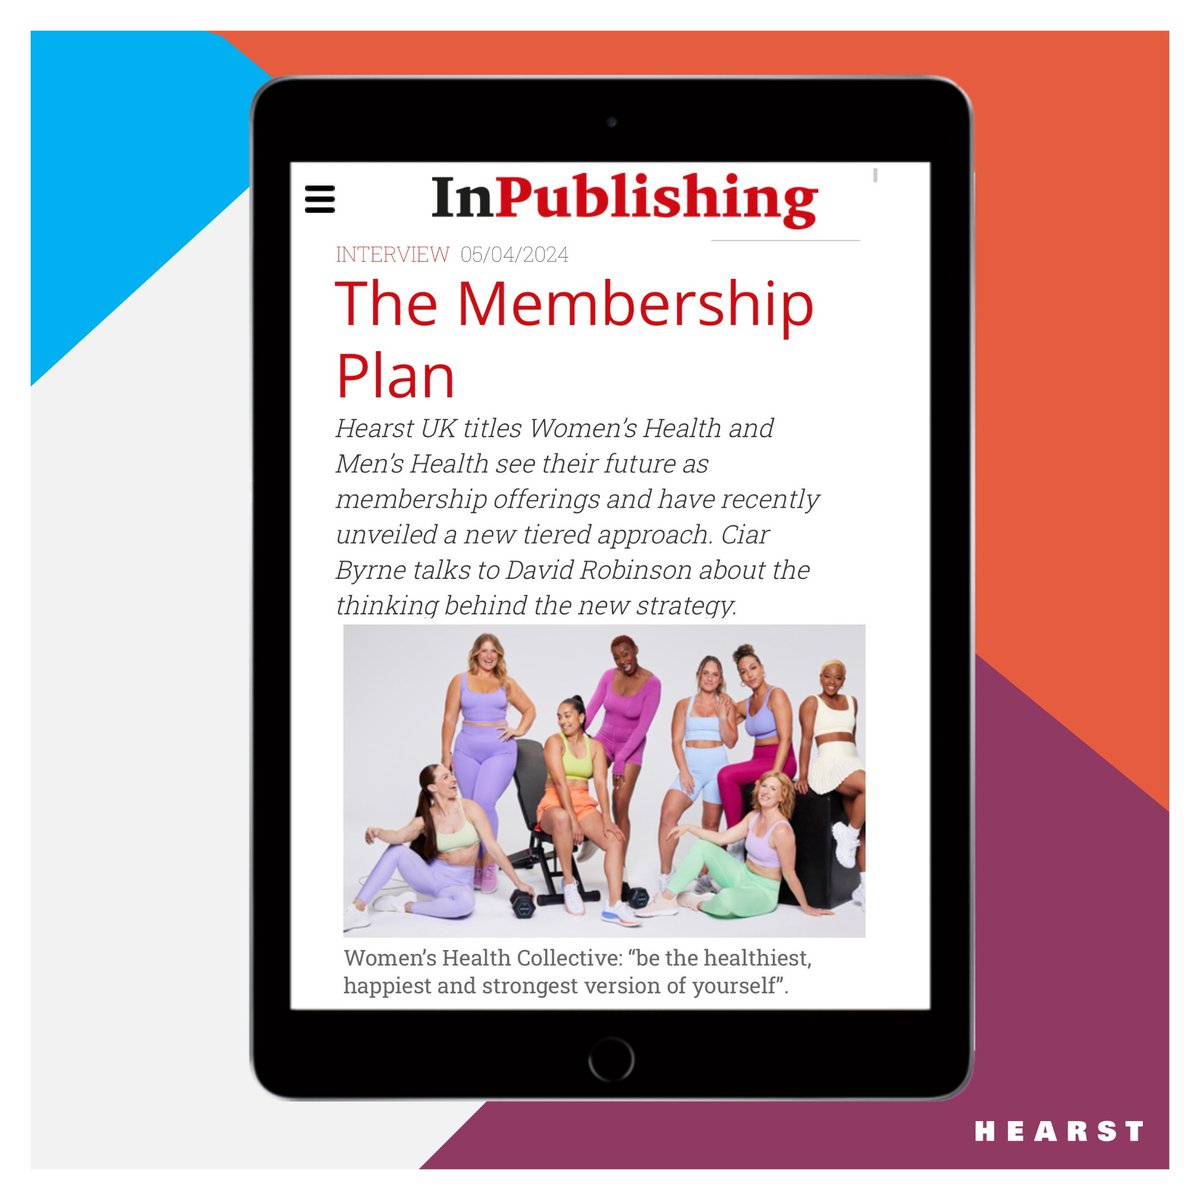 A few months after the successful enhancements to the Women’s Health Collective and Men’s Health Squad, Hearst UK's Chief Customer Officer, David Robinson, spoke to @InPublishing about the strategy behind the new membership propositions. Read more here 👉bit.ly/4cR92Jb